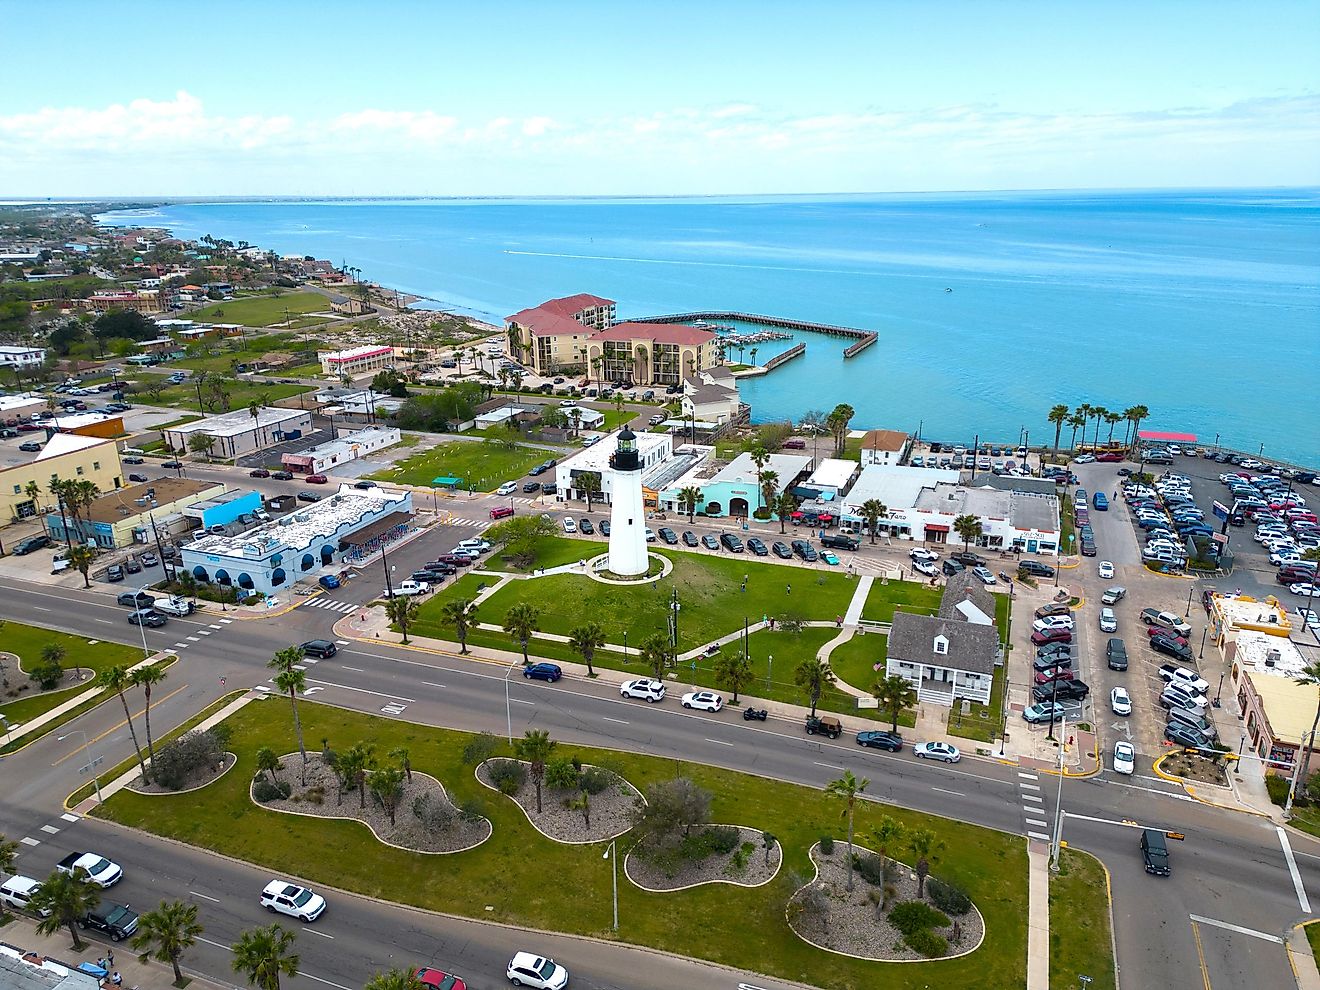 Aerial view of the lighthouse at Port Isabel, Texas.